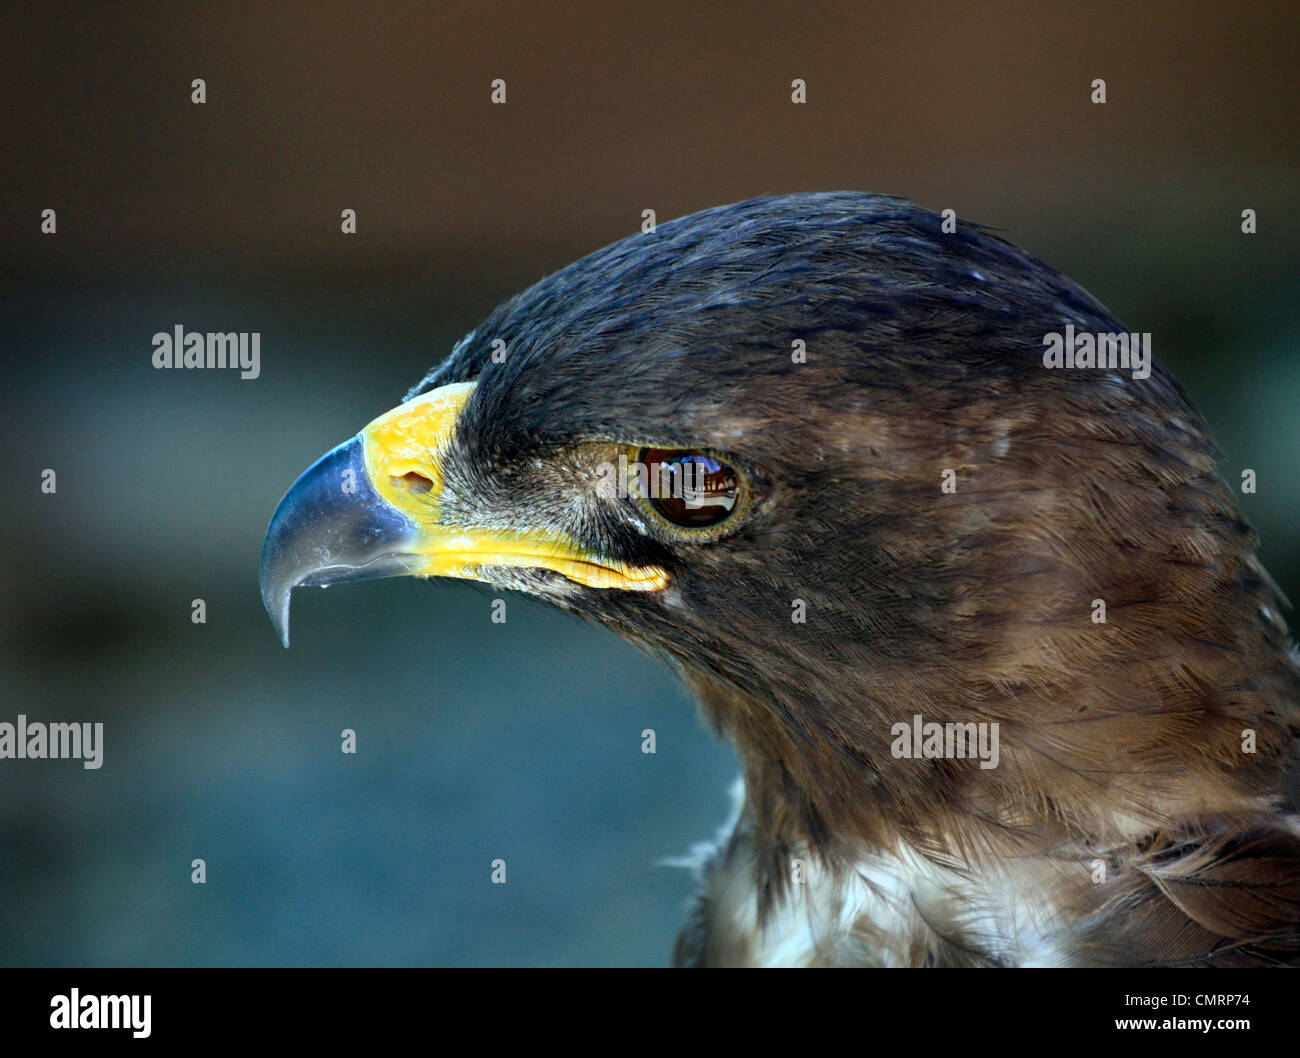 Wahlberg's Eagle (Aquila wahlbergi) at Eagle Encounter at Spier Wine Estate. Stock Photo